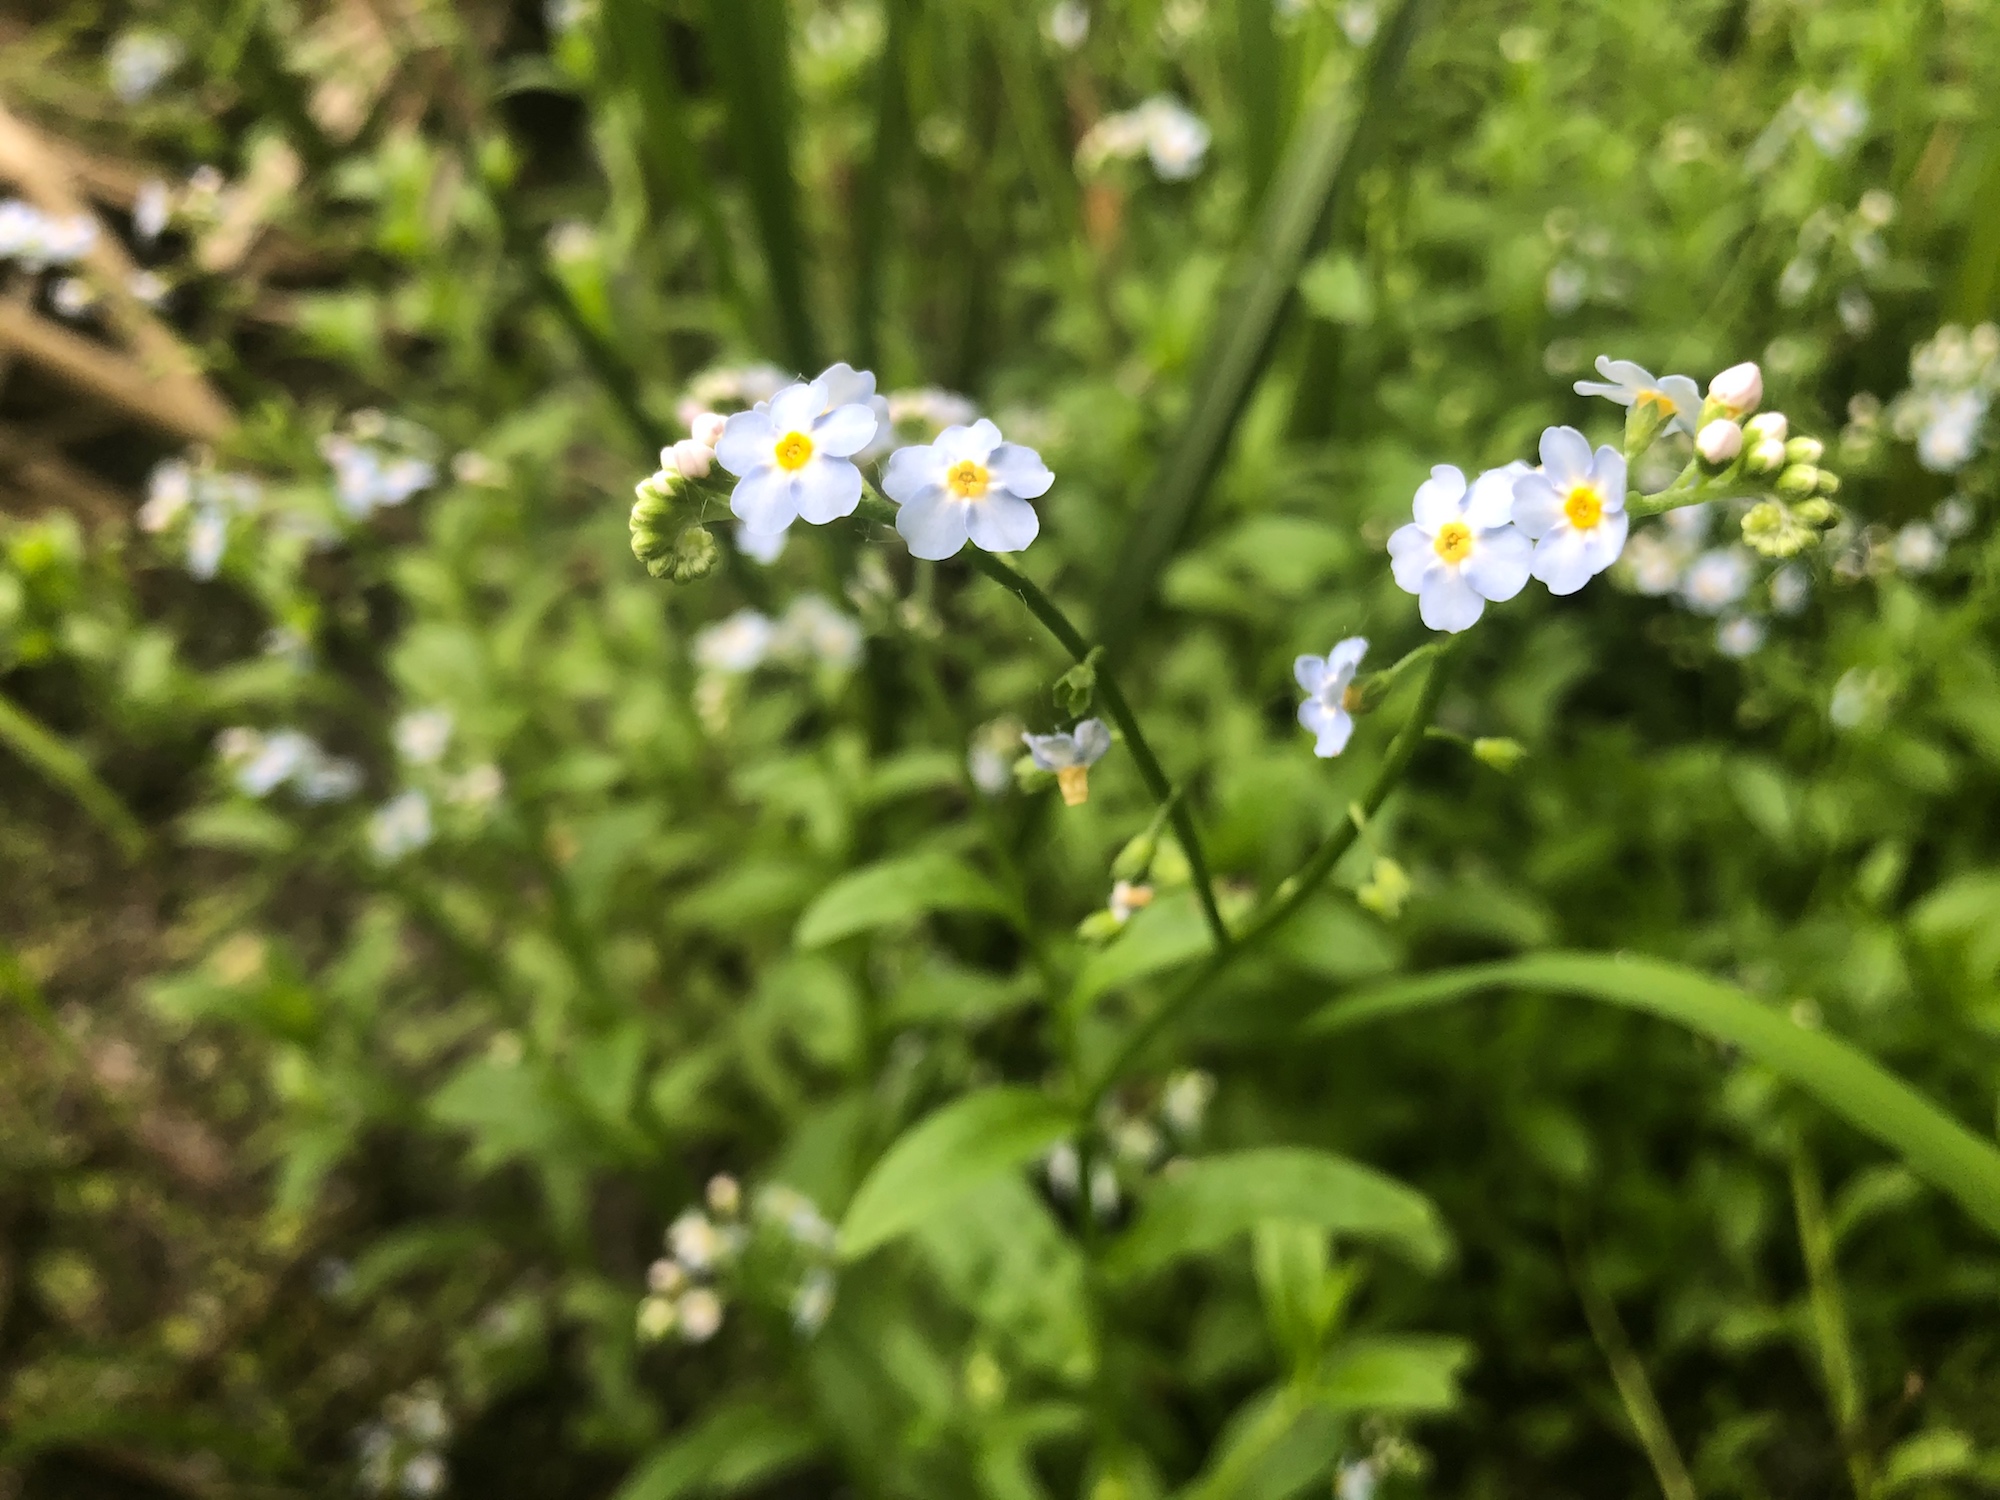 True Forget-me-not near cattails at Pickford Street stormwater outflow into Lake Wingra in Madison, Wisconsin on June 9, 2020.